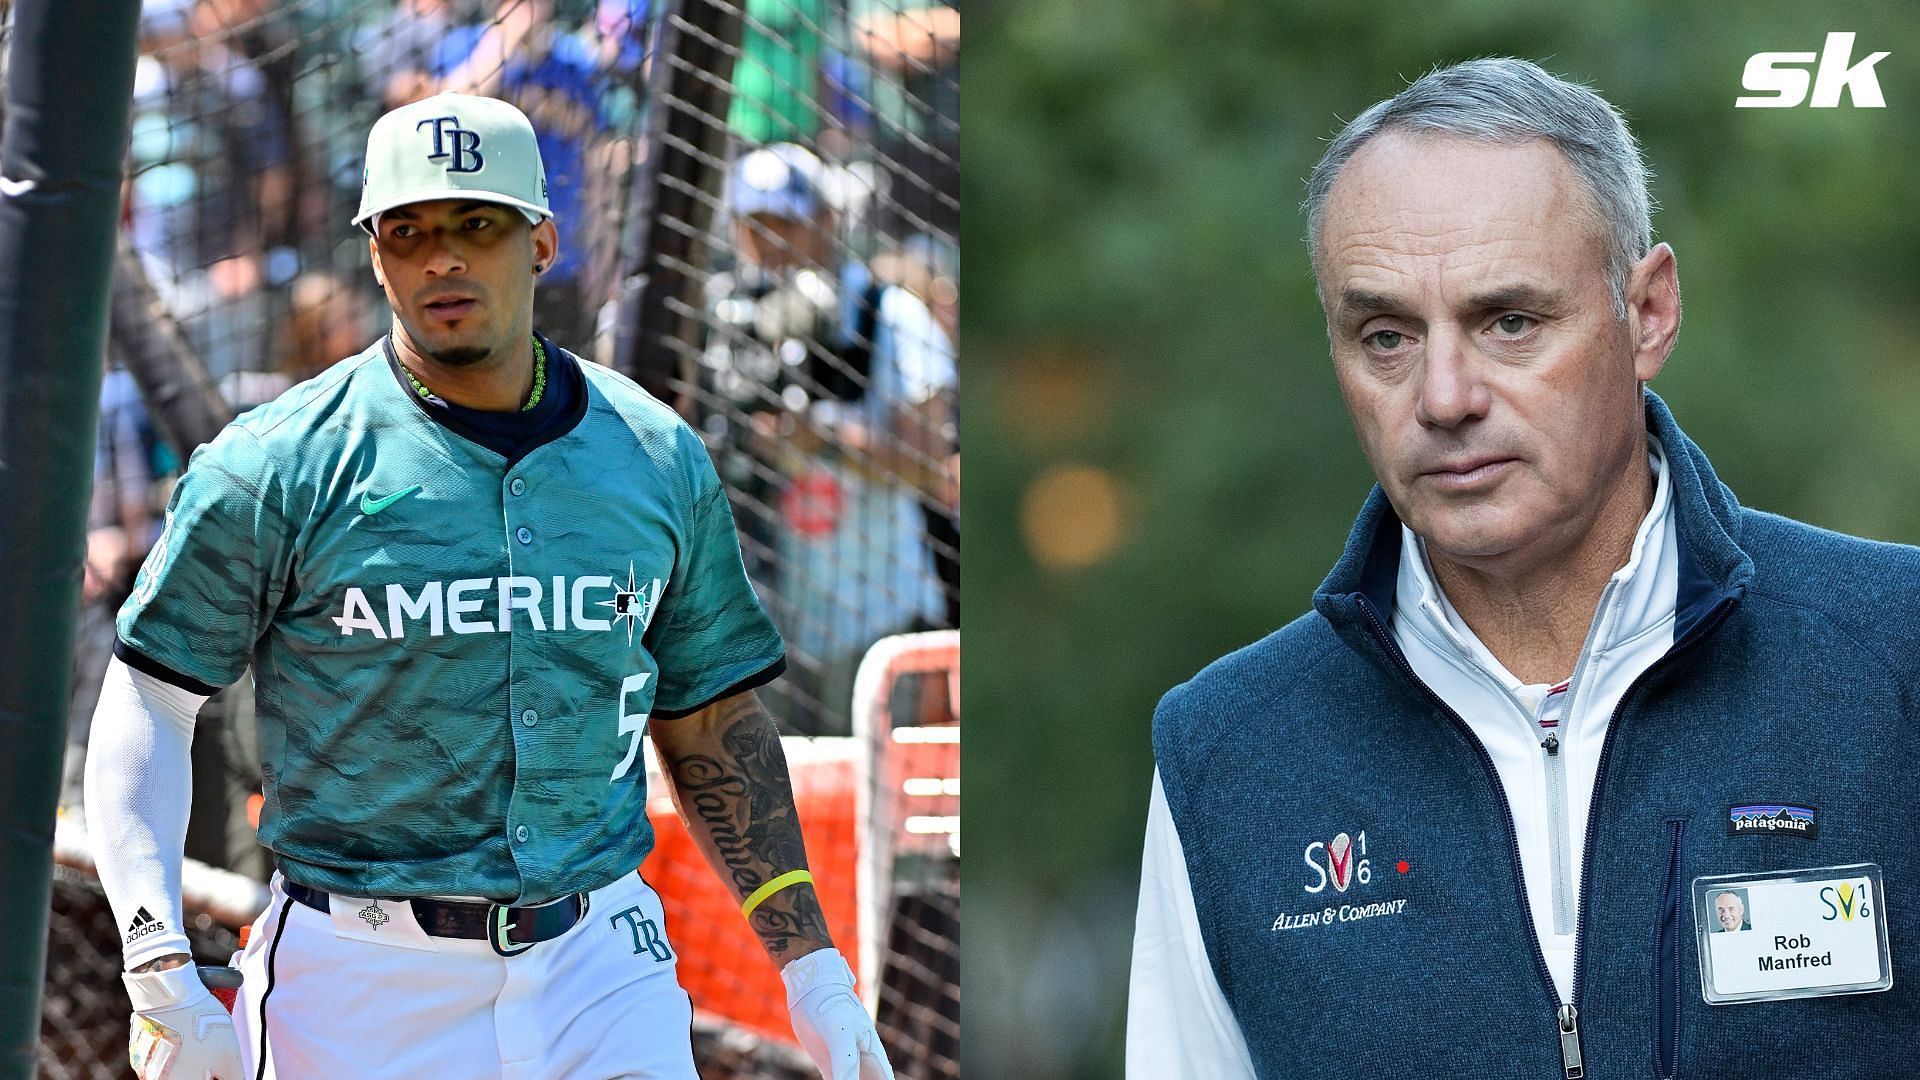 MLB boss Rob Manfred is being very careful about commenting on the ongoing Wander Franco case